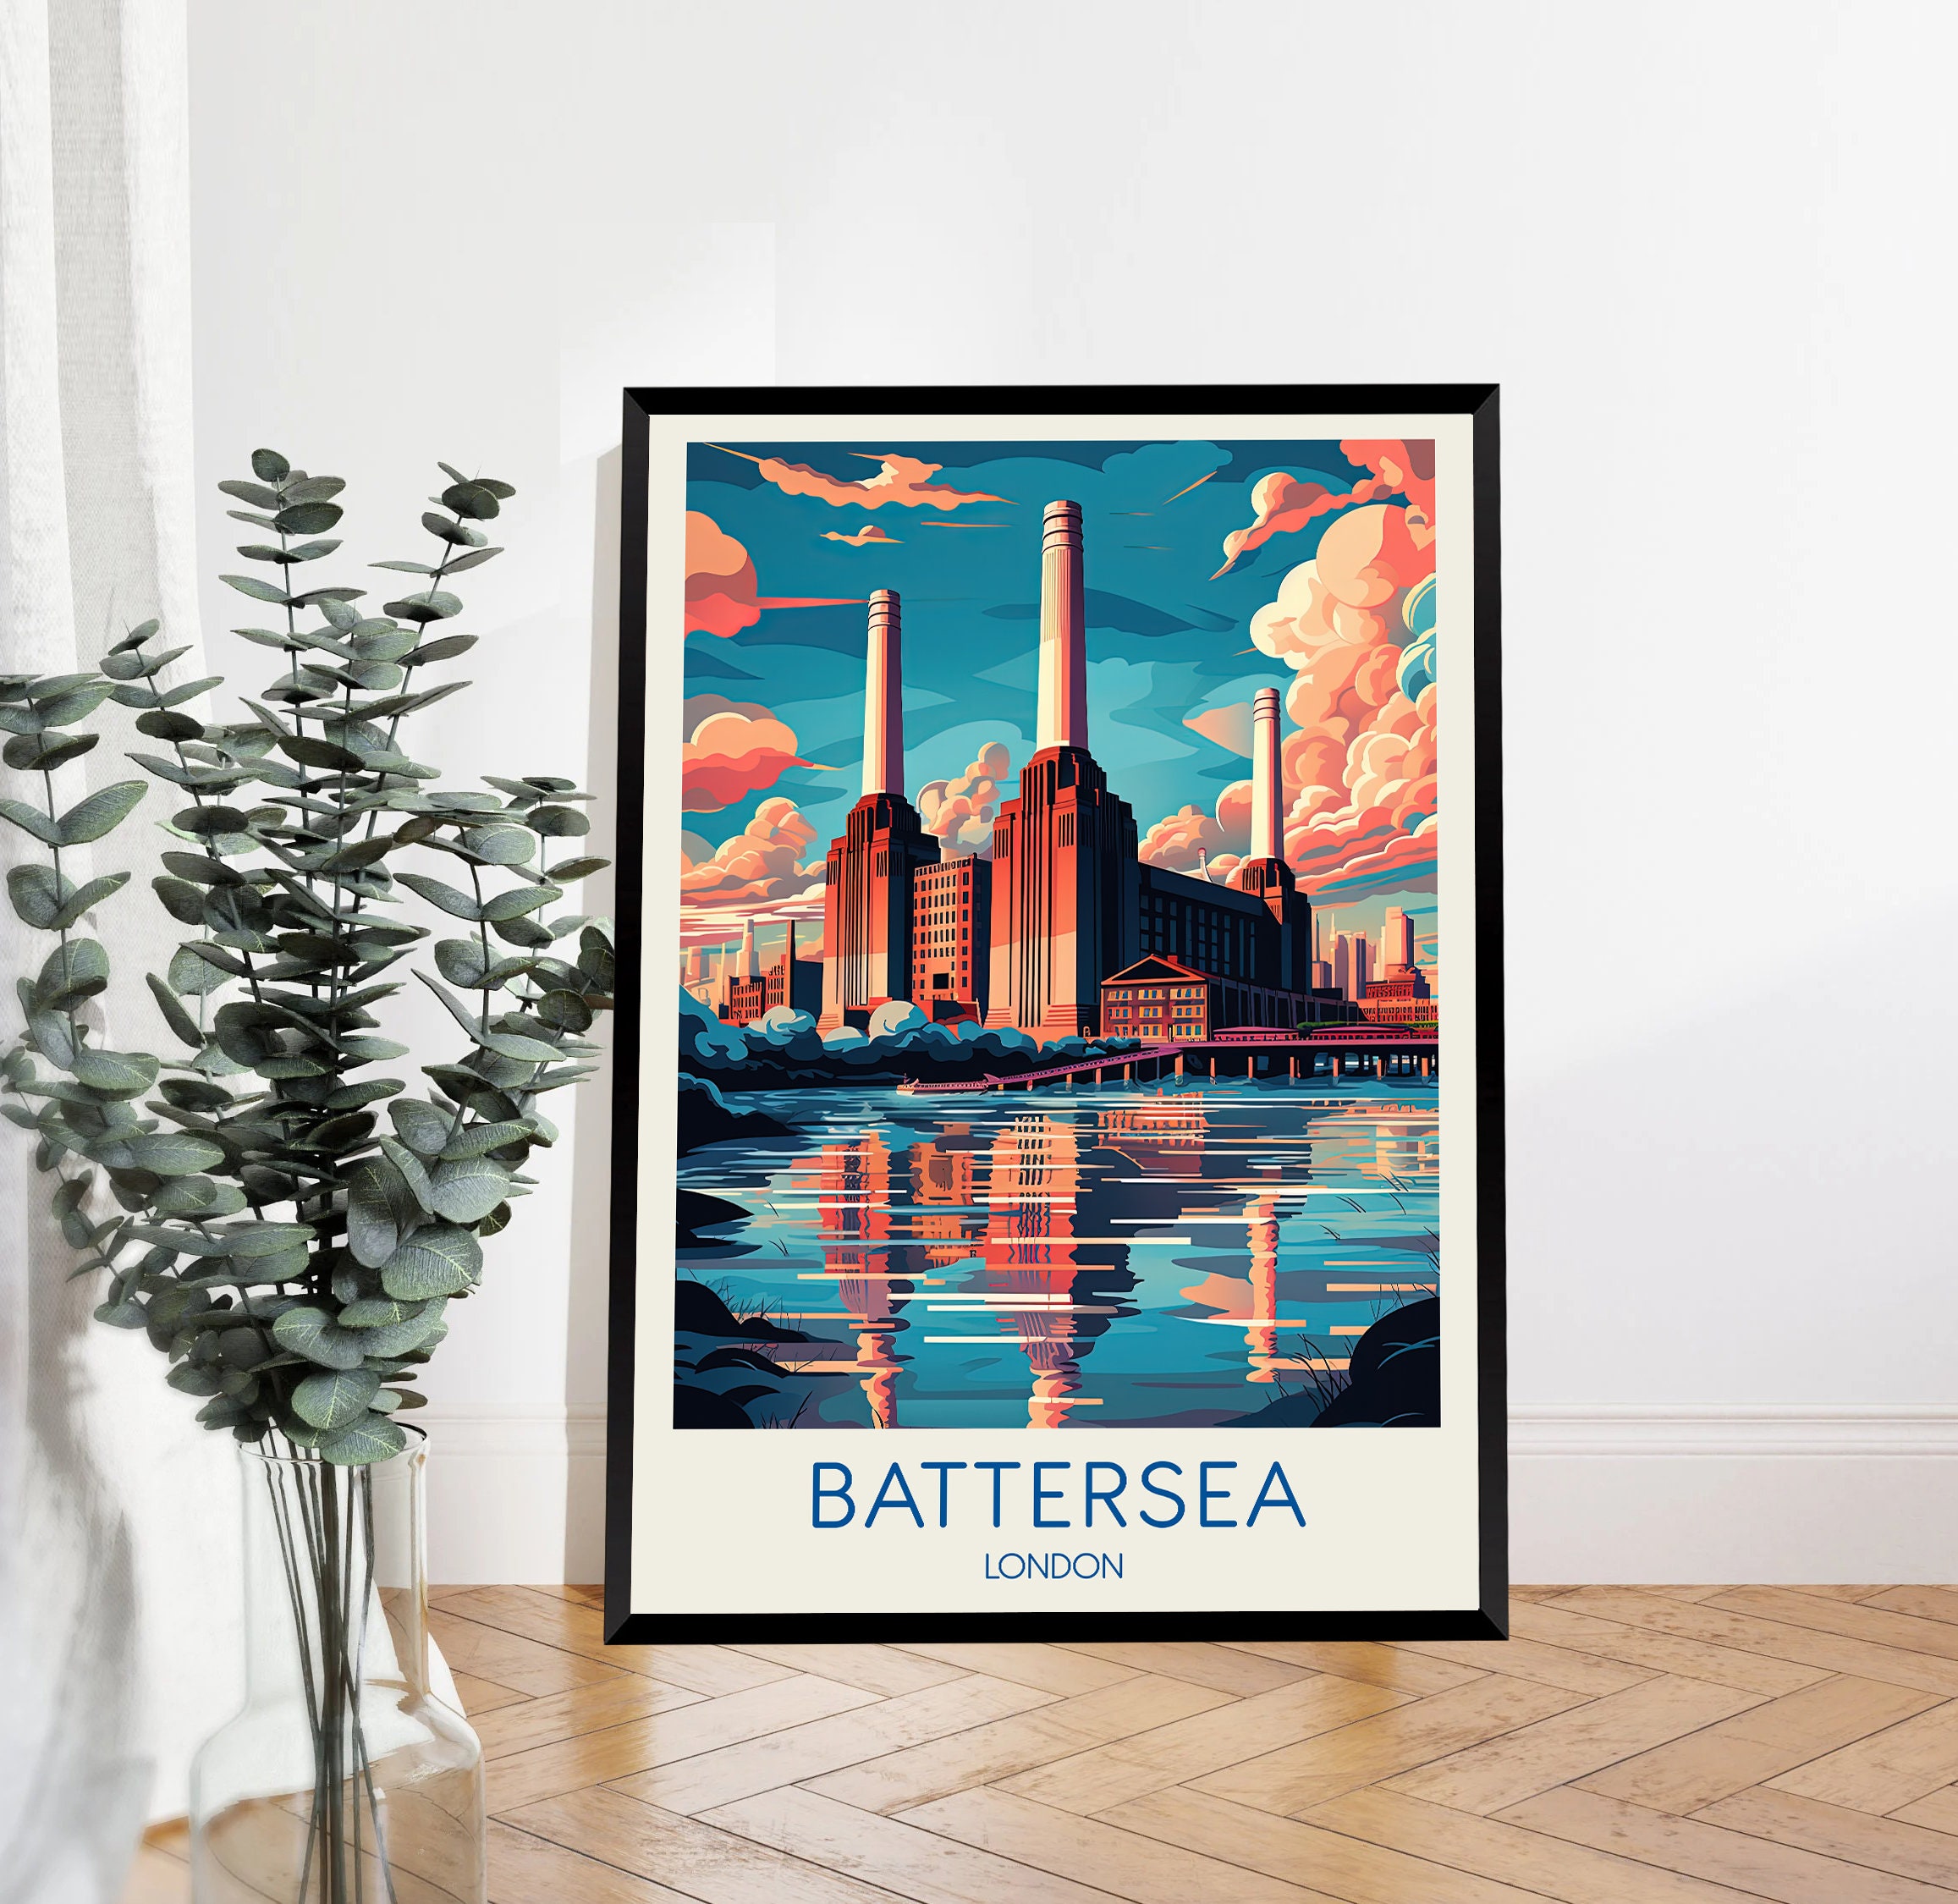 Discover Battersea Poster, London Poster, Battersea Print, Battersea Painting, Battersea Art, Illustration Art, Travel Gifts, Travel Poster,  No Frame